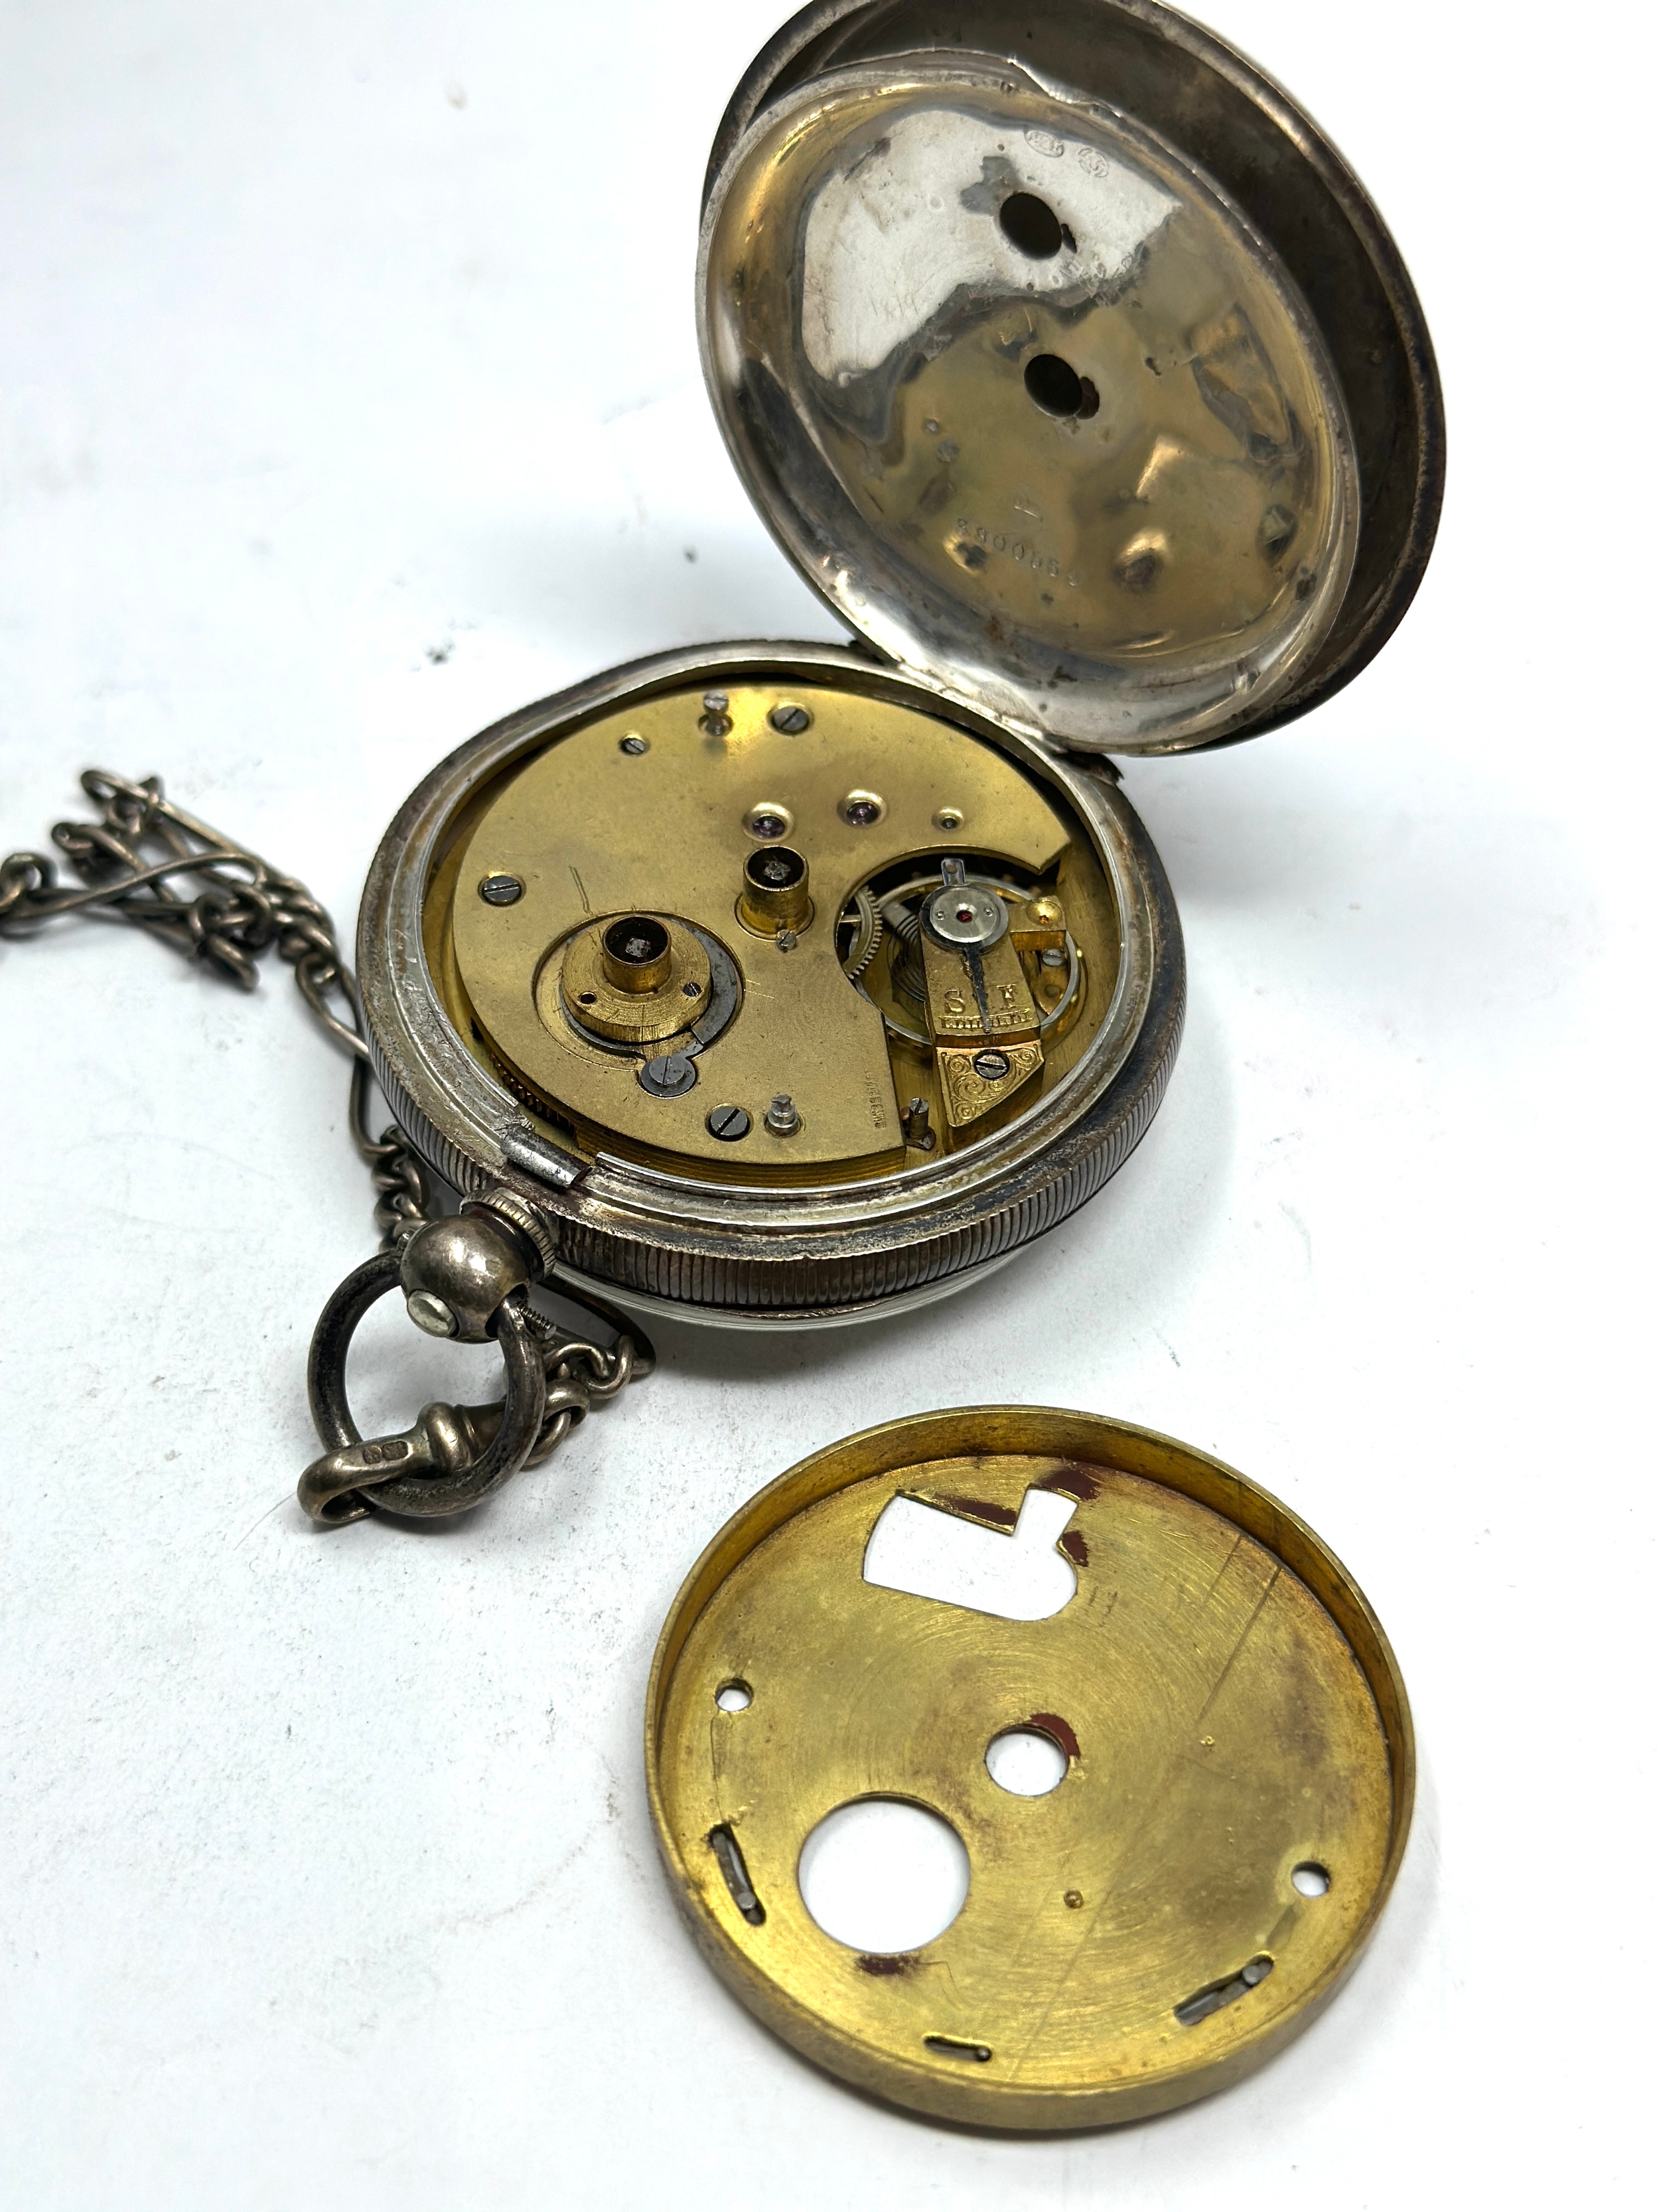 Antique silver open face pocket watch the watch is ticking with silver watch chain no t-bar - Image 3 of 3